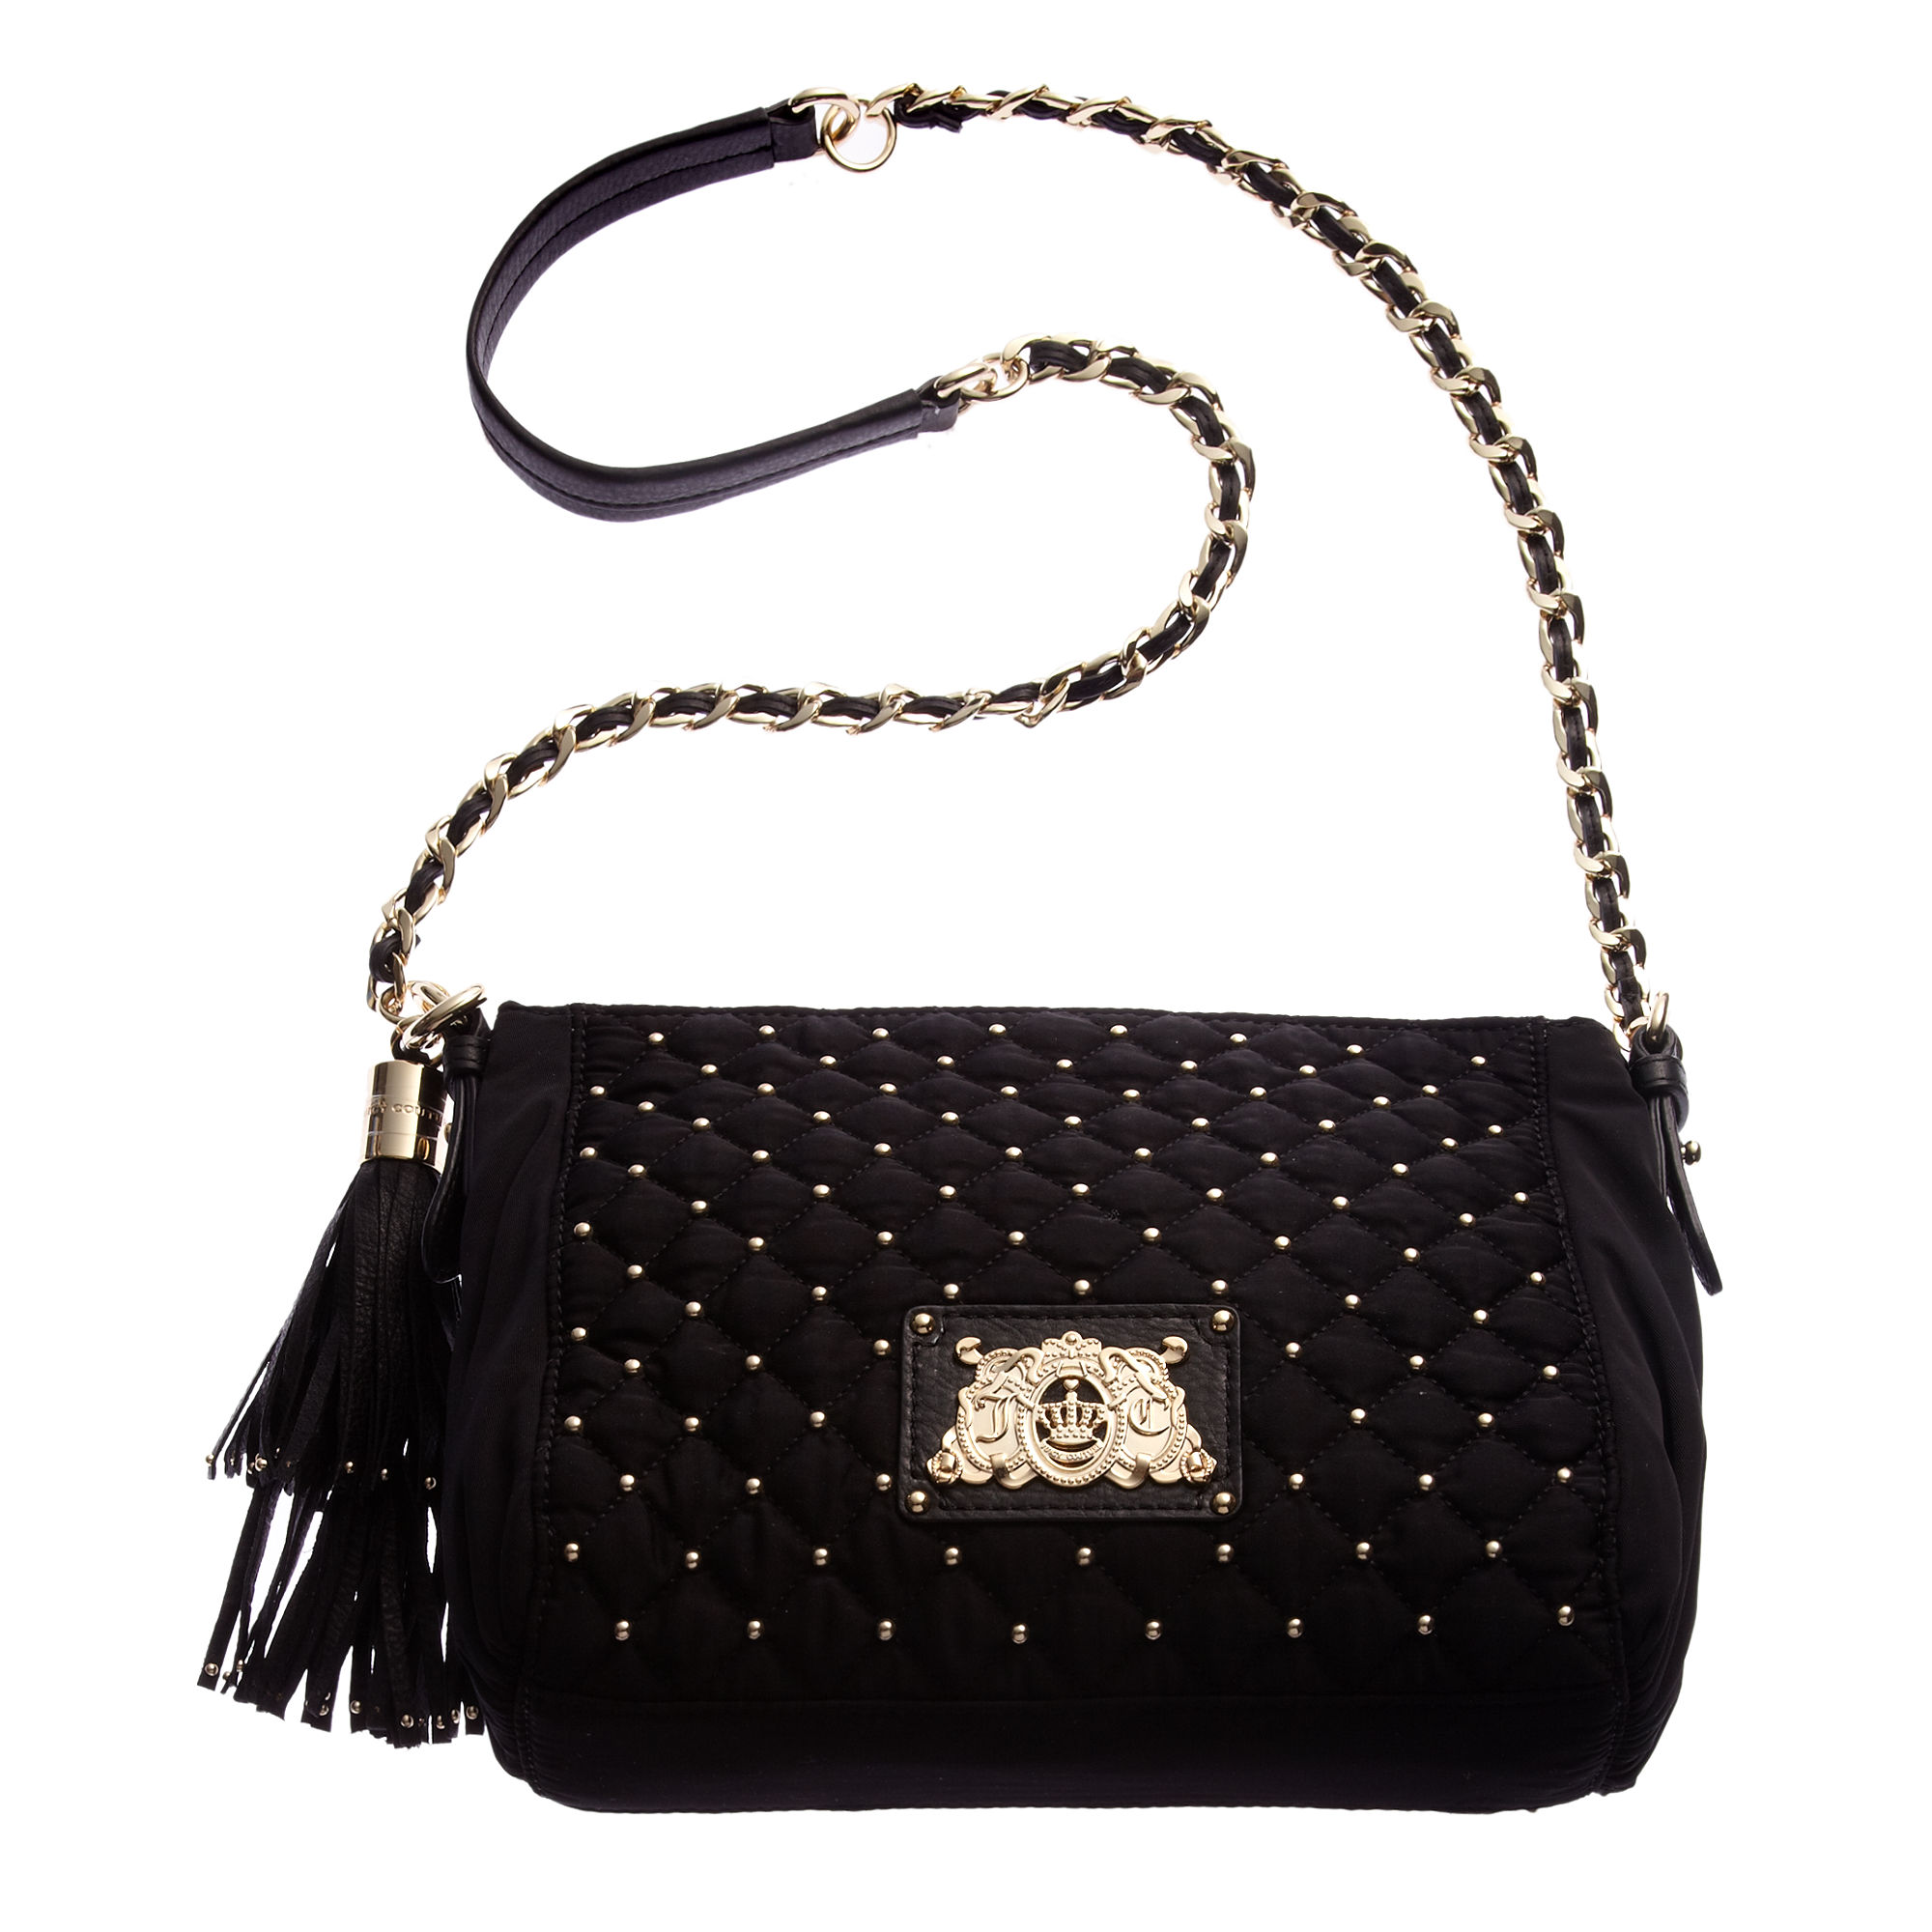 Juicy Couture Upscale Quilted Nylon Mini Kiki Bag in Black (royal navy ...